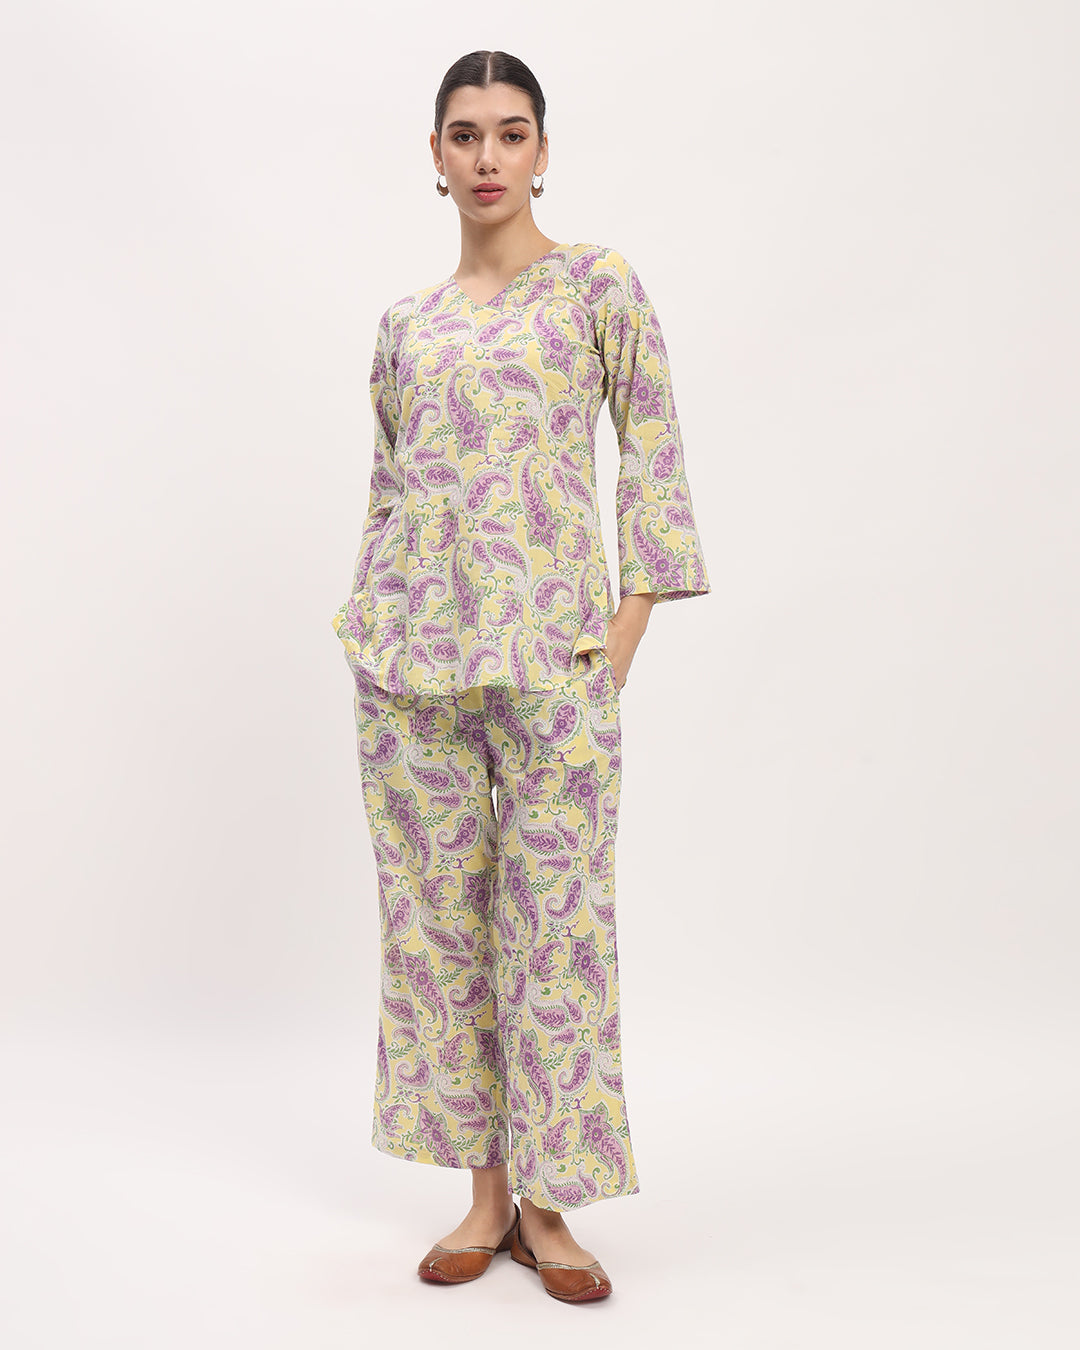 Combo: Fire Lillies & Lavender Paisley V Neck Printed Short Kurta (Without Bottoms)